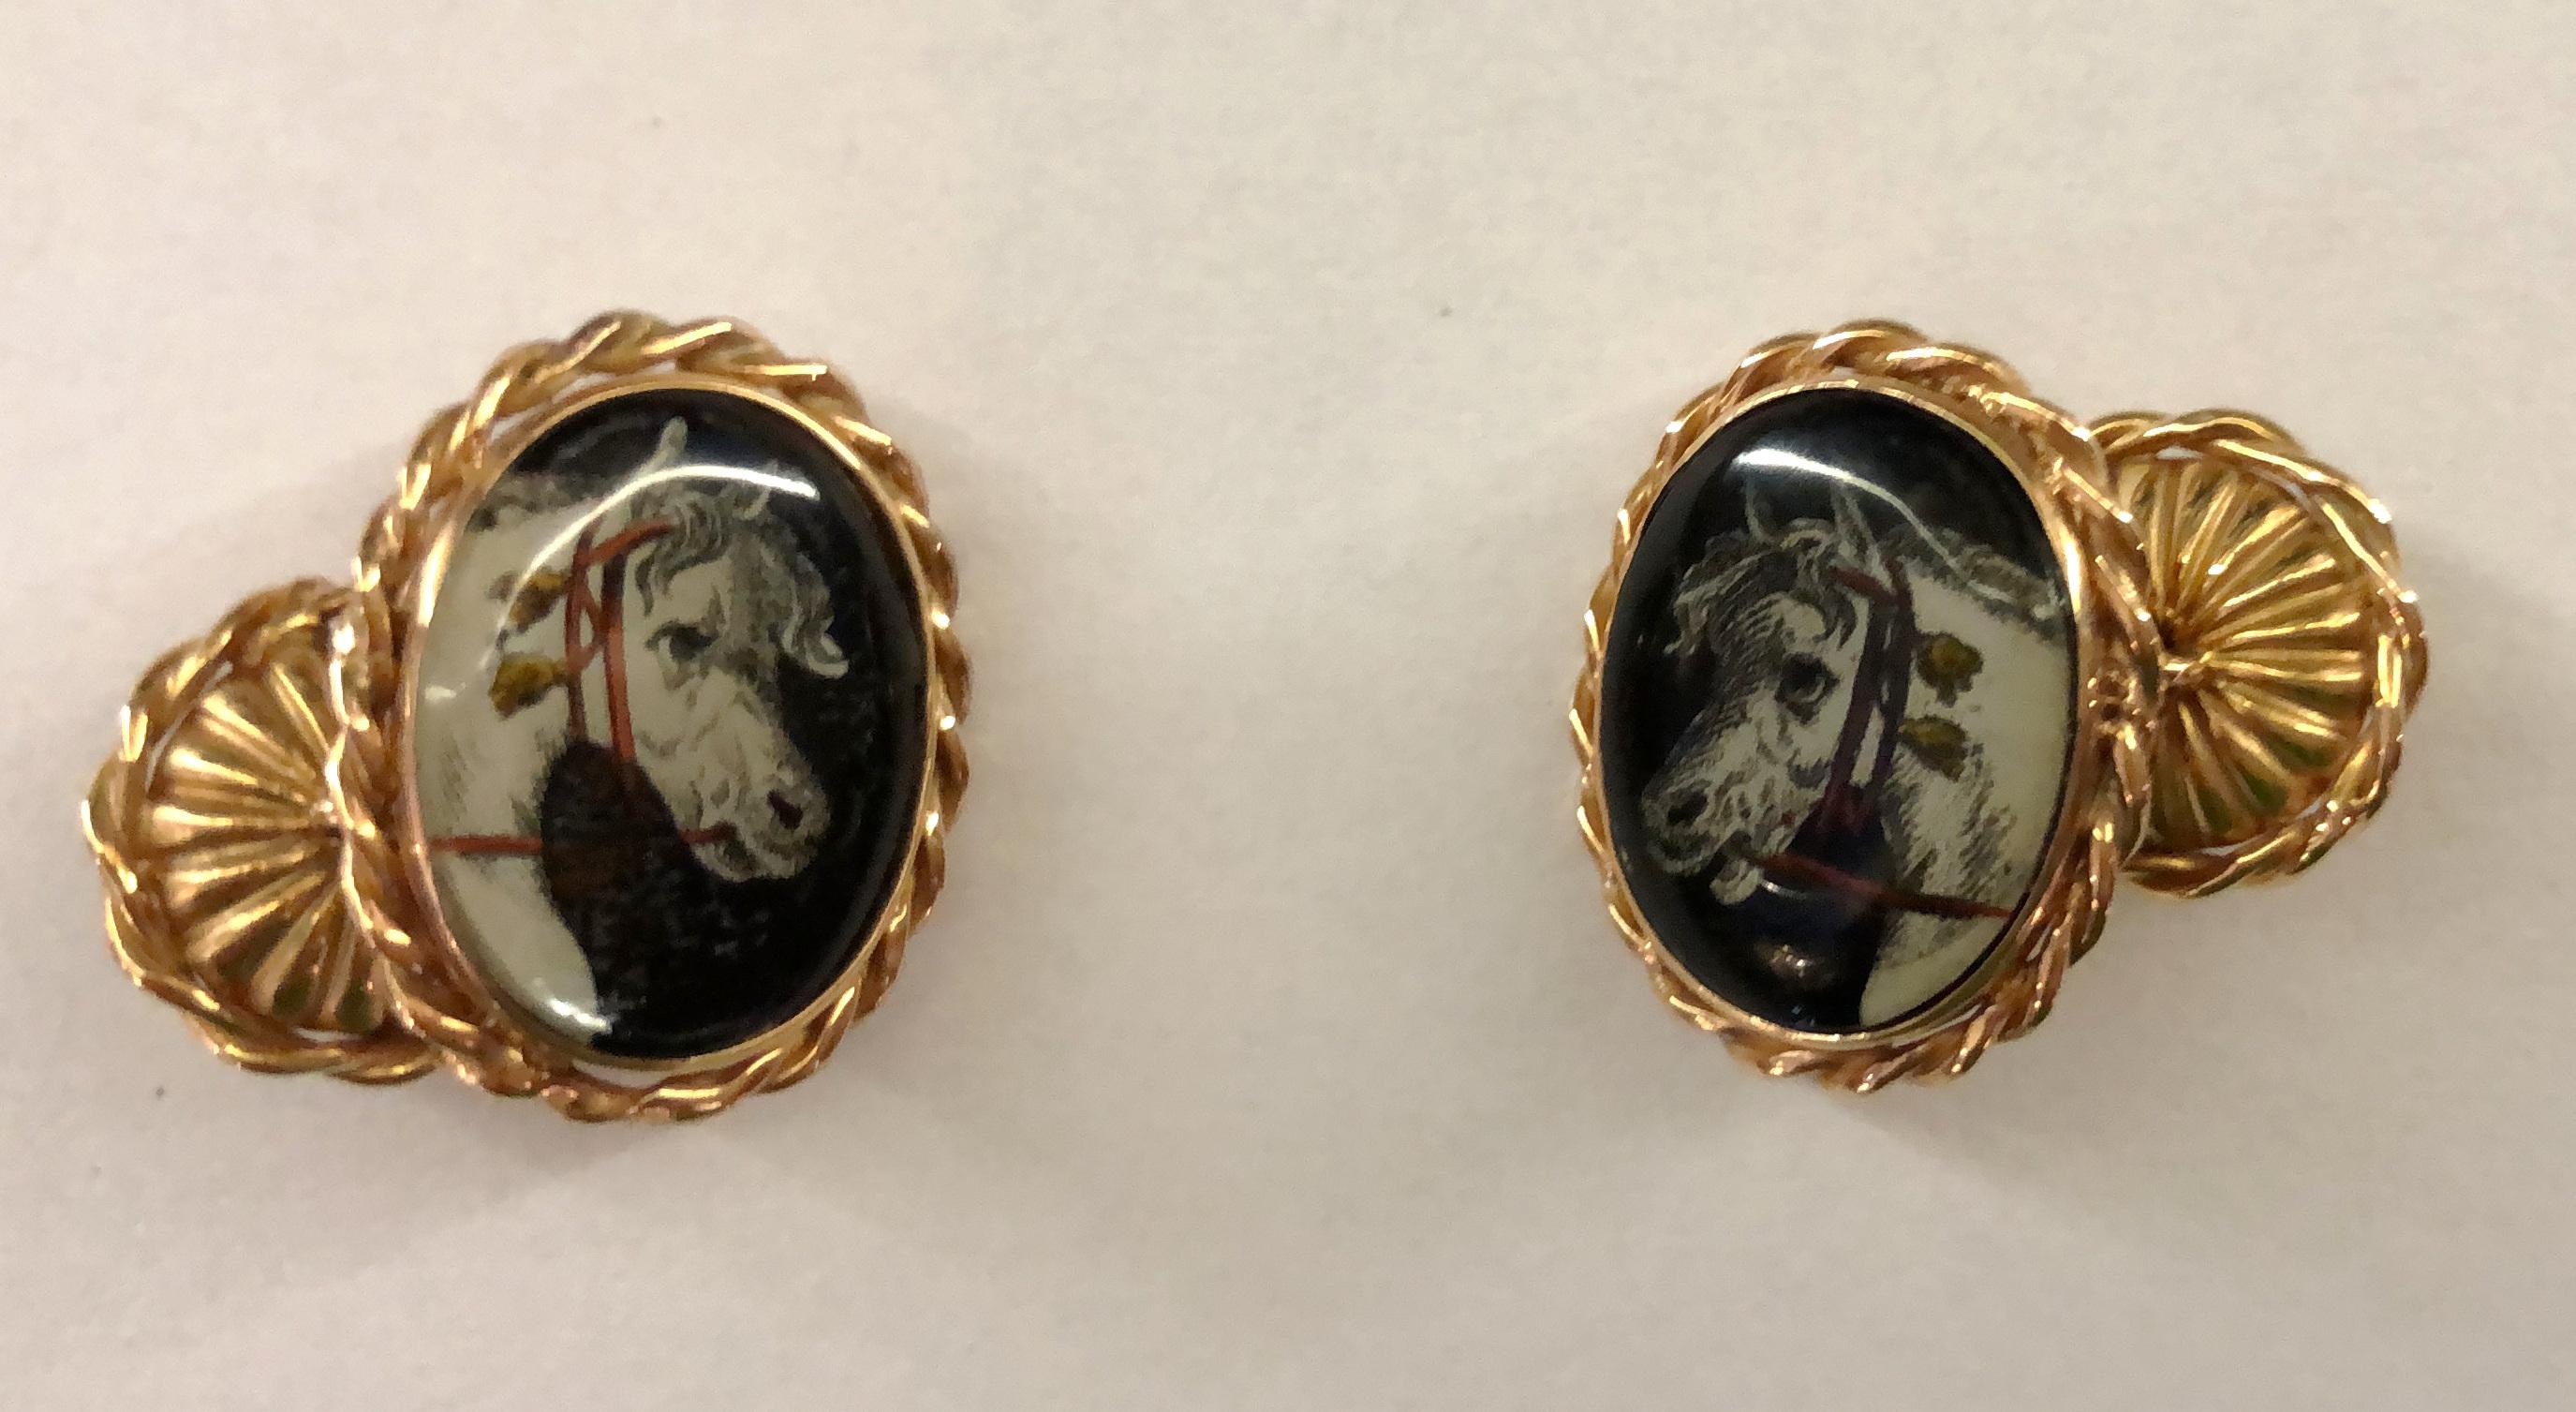 Pair of vintage 14 karat yellow gold cufflinks with enamels depicting horses, Italy 1920s-1940s
Length 2cm, width 1.5cm